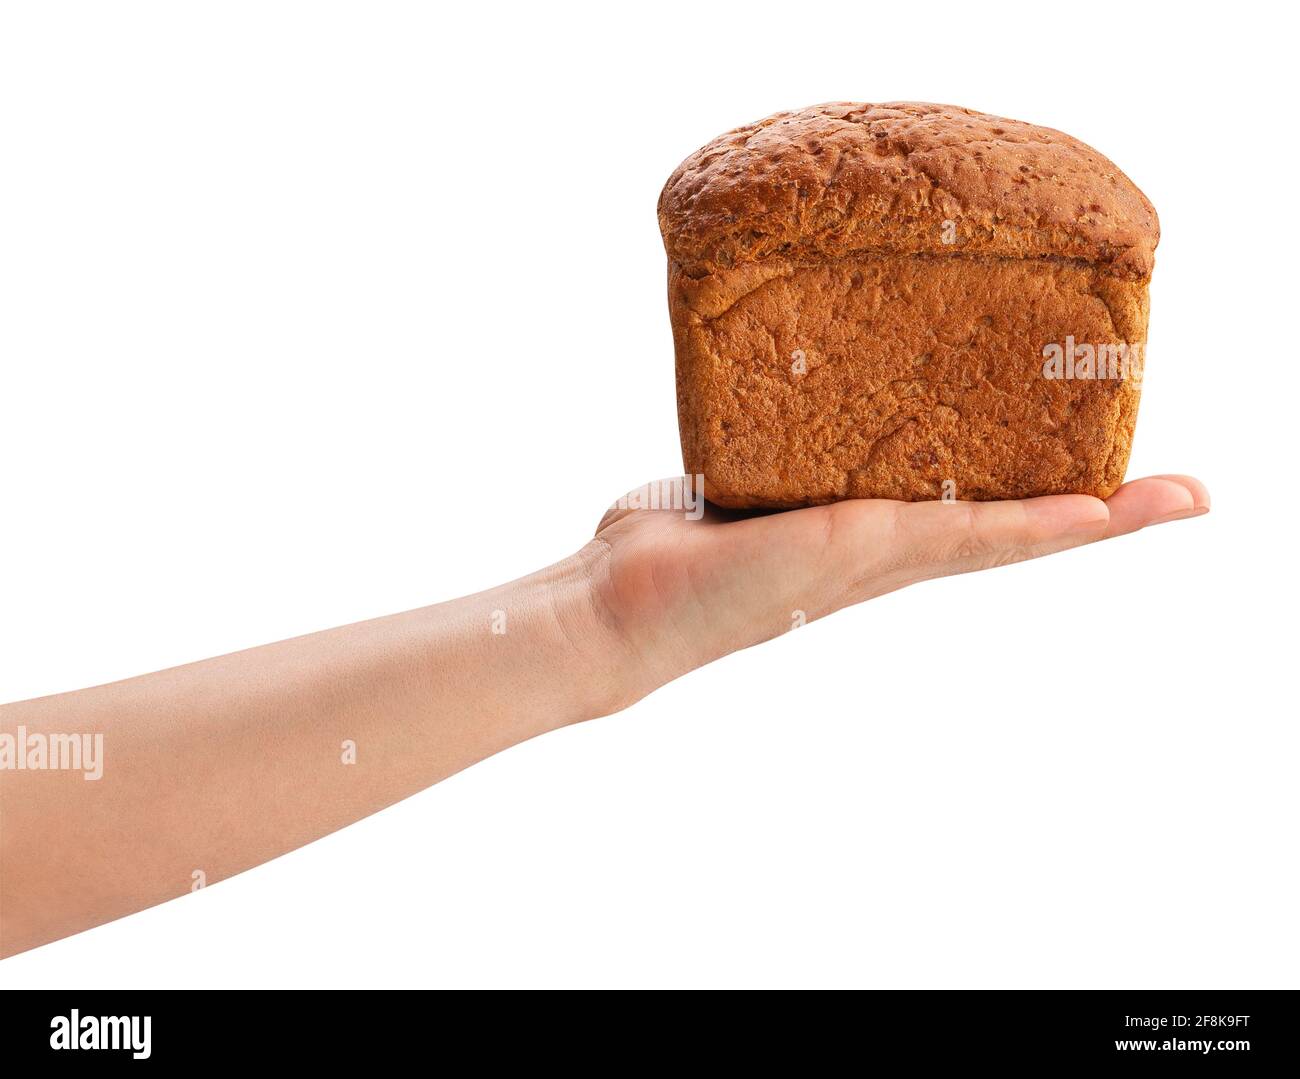 brown bread in hand path isolated on white Stock Photo